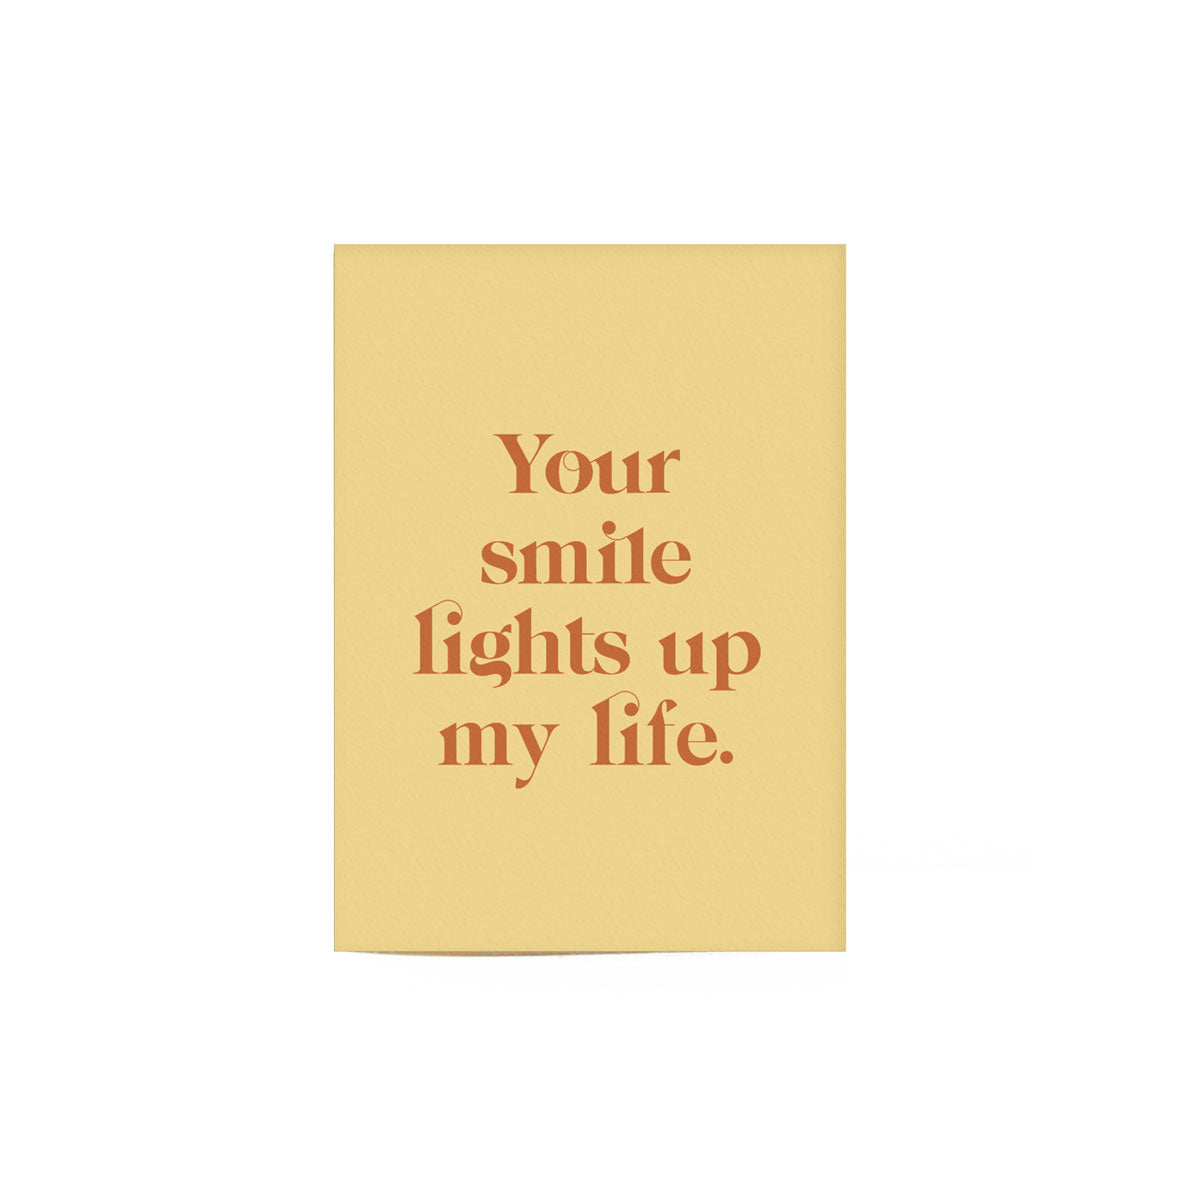 yellow smile lights up my life card that reads "Your smile lights up my life" in brownish orang text